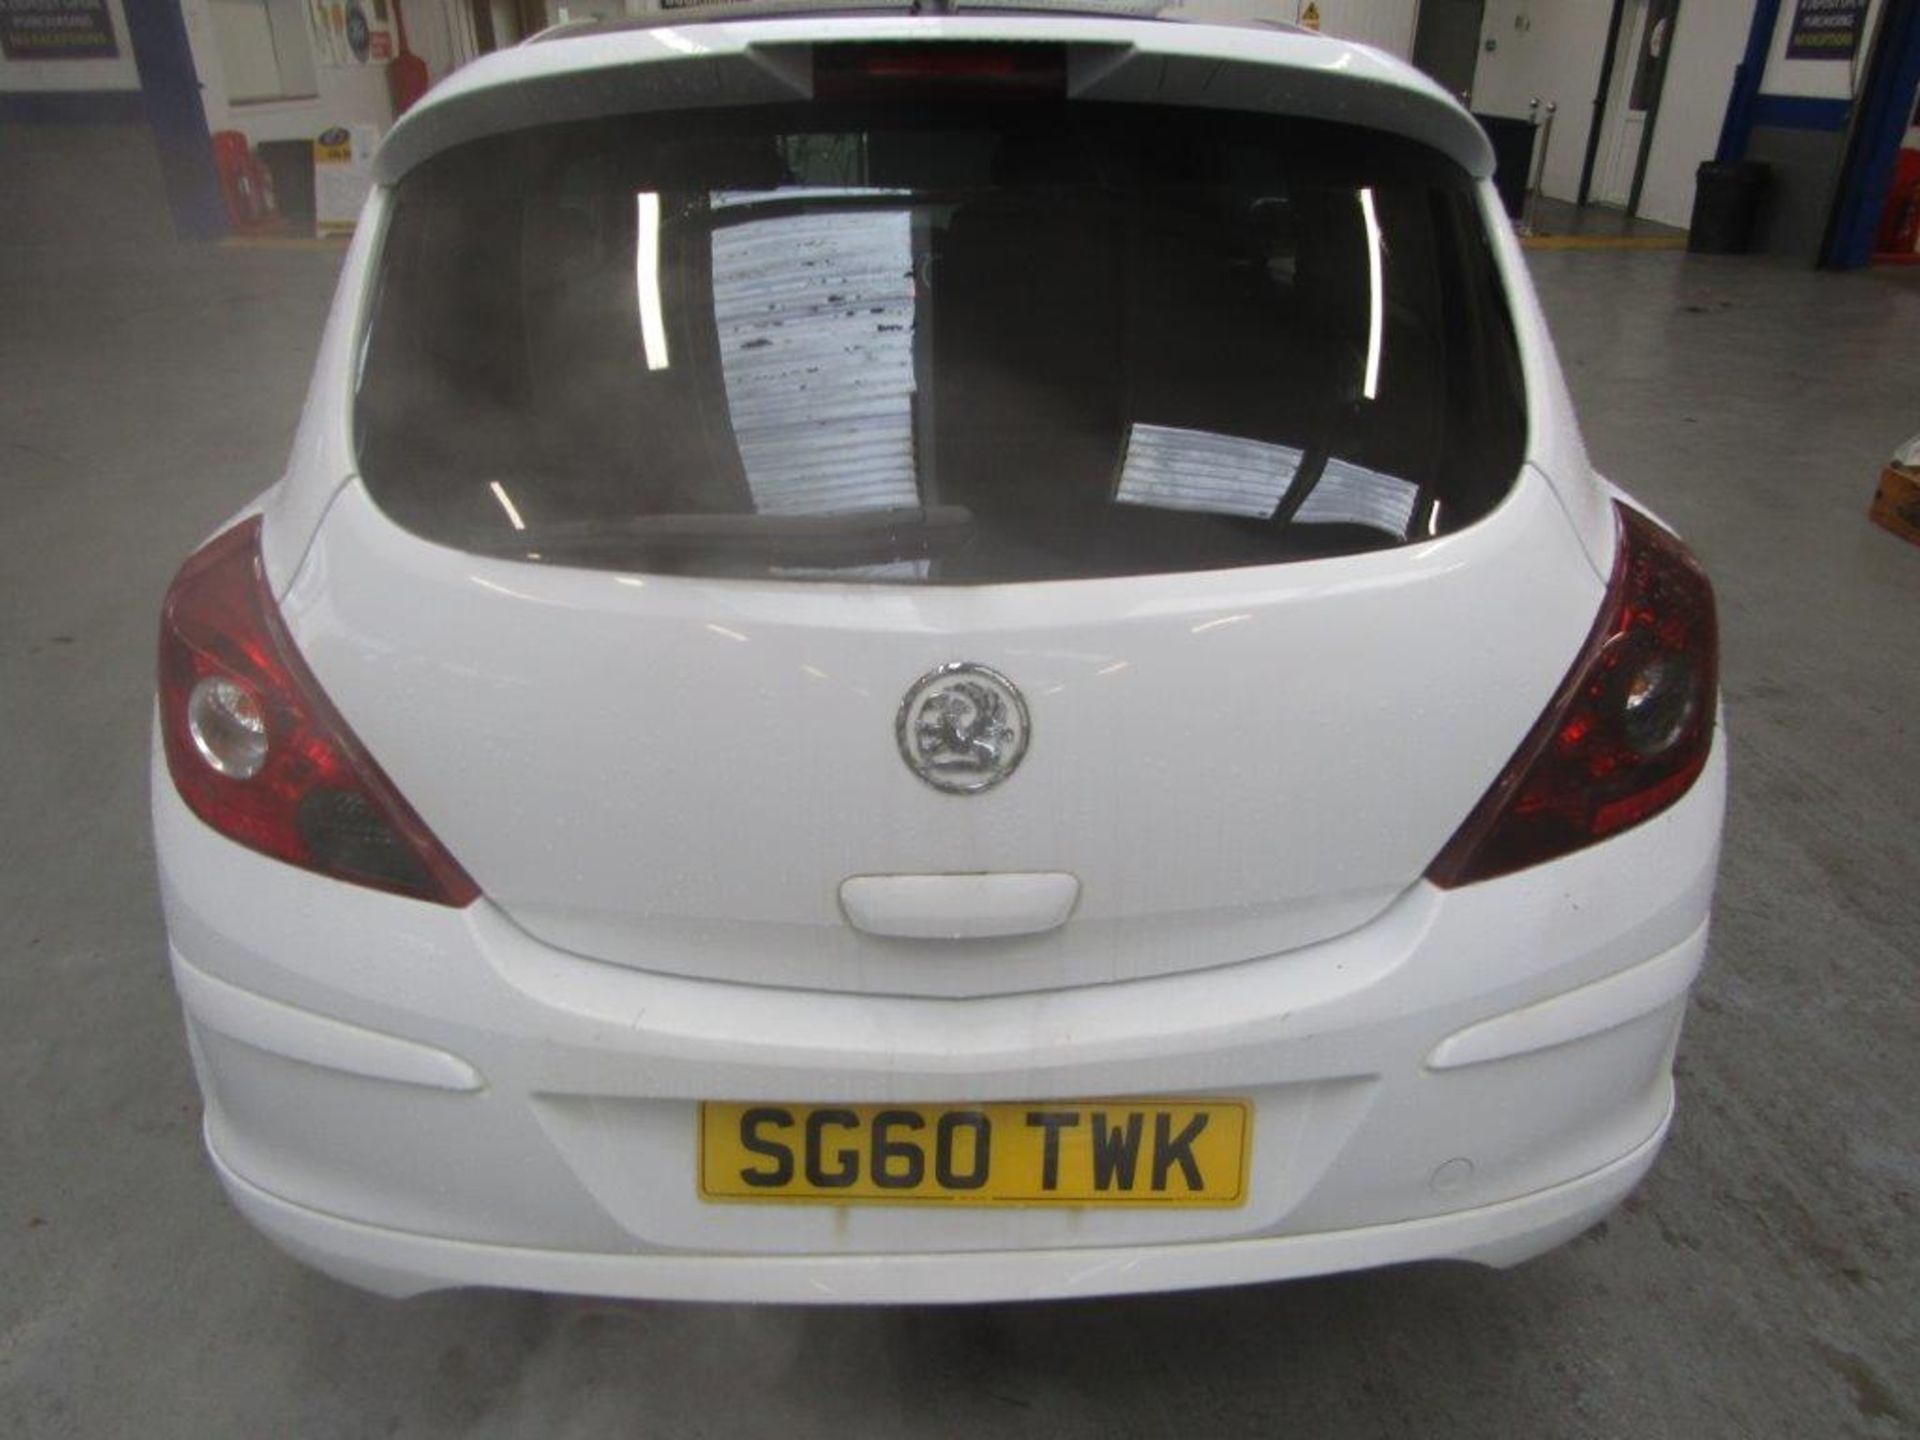 60 10 Vauxhall Corsa Limited Edition - Image 4 of 15